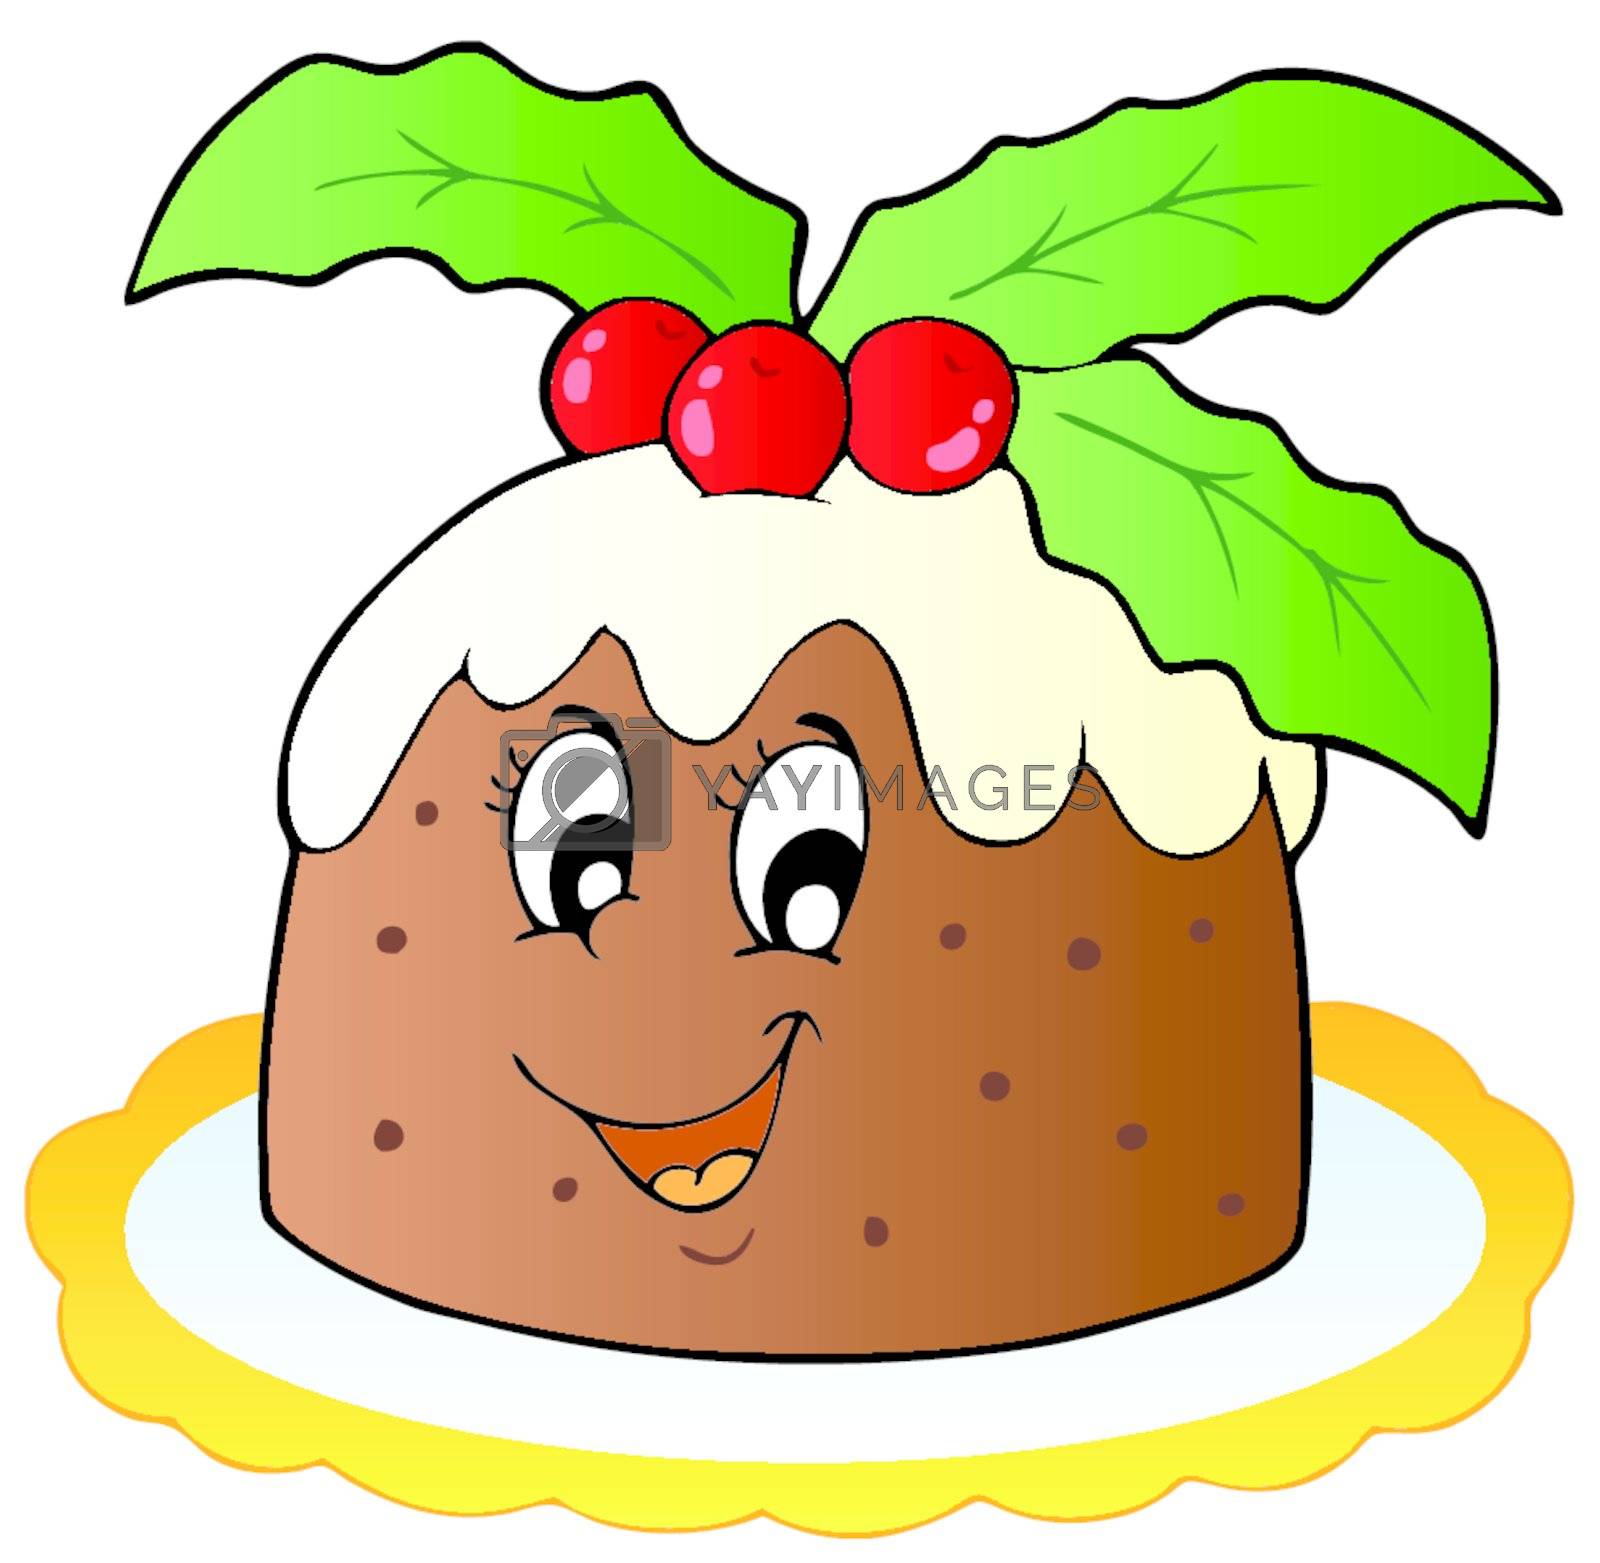 Royalty Free Vector | Cartoon Christmas pudding by clairev